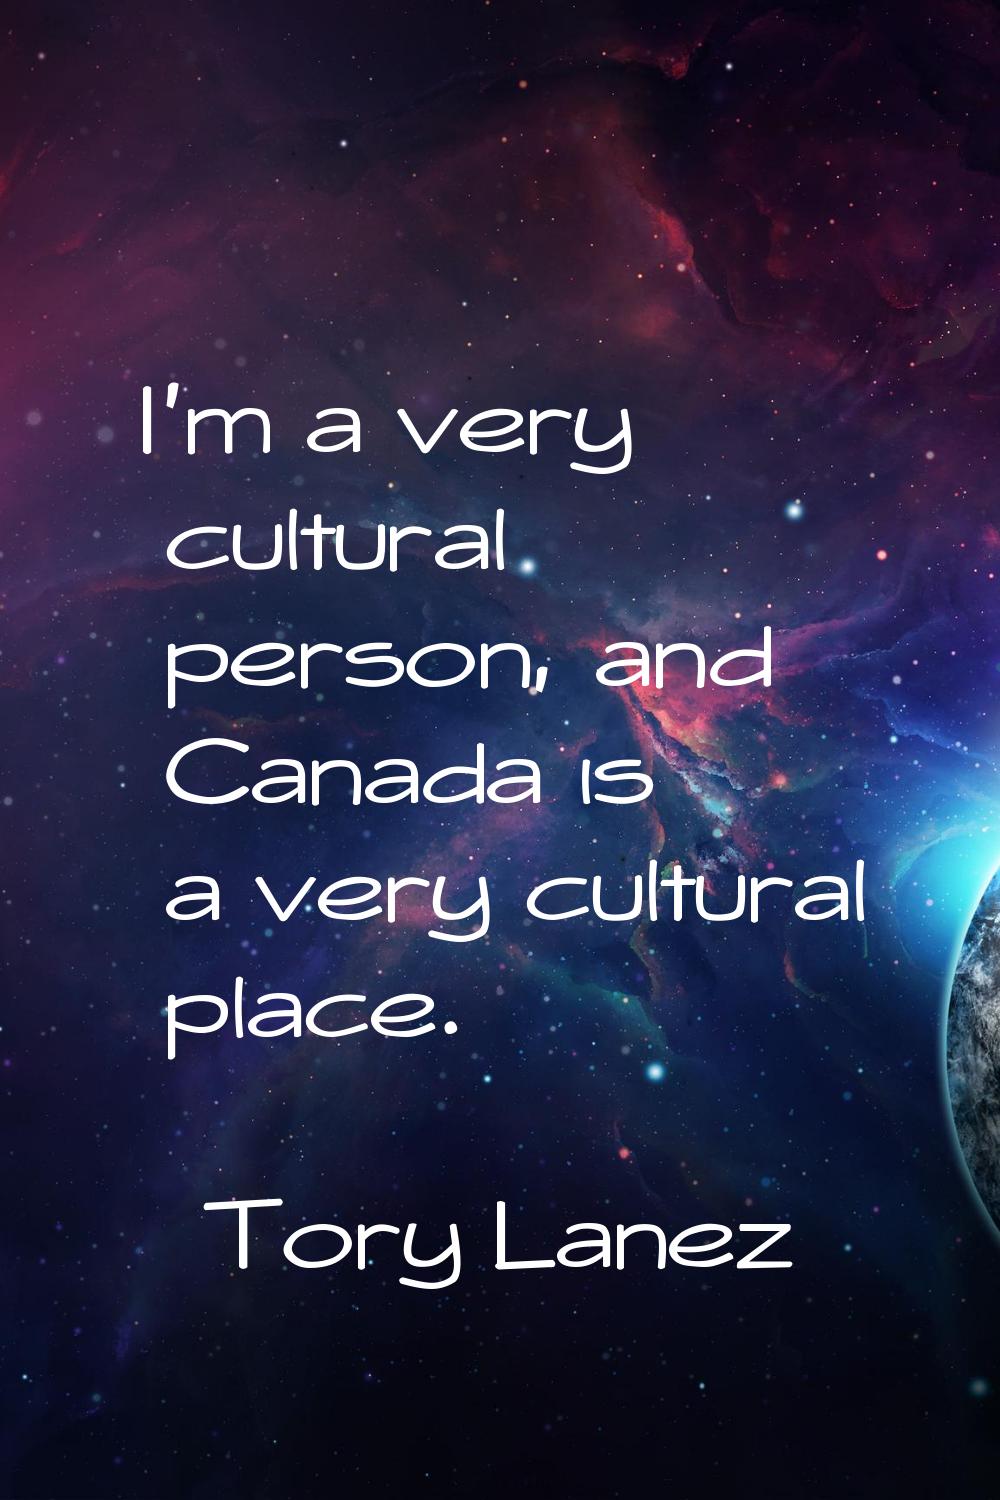 I'm a very cultural person, and Canada is a very cultural place.